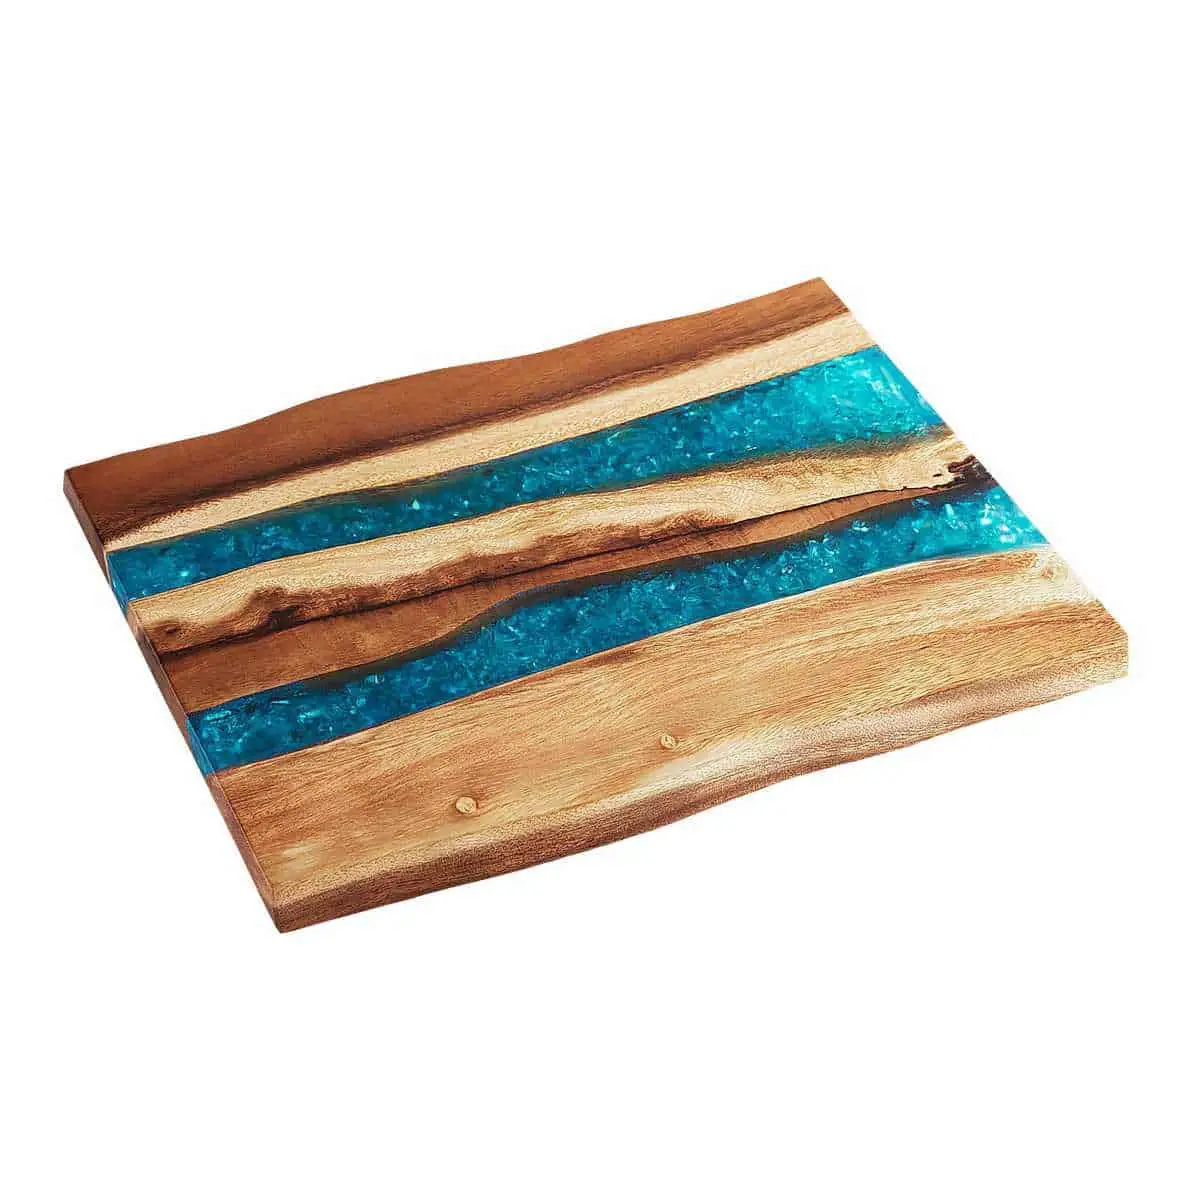 Wooden cheese board with turquoise stripes